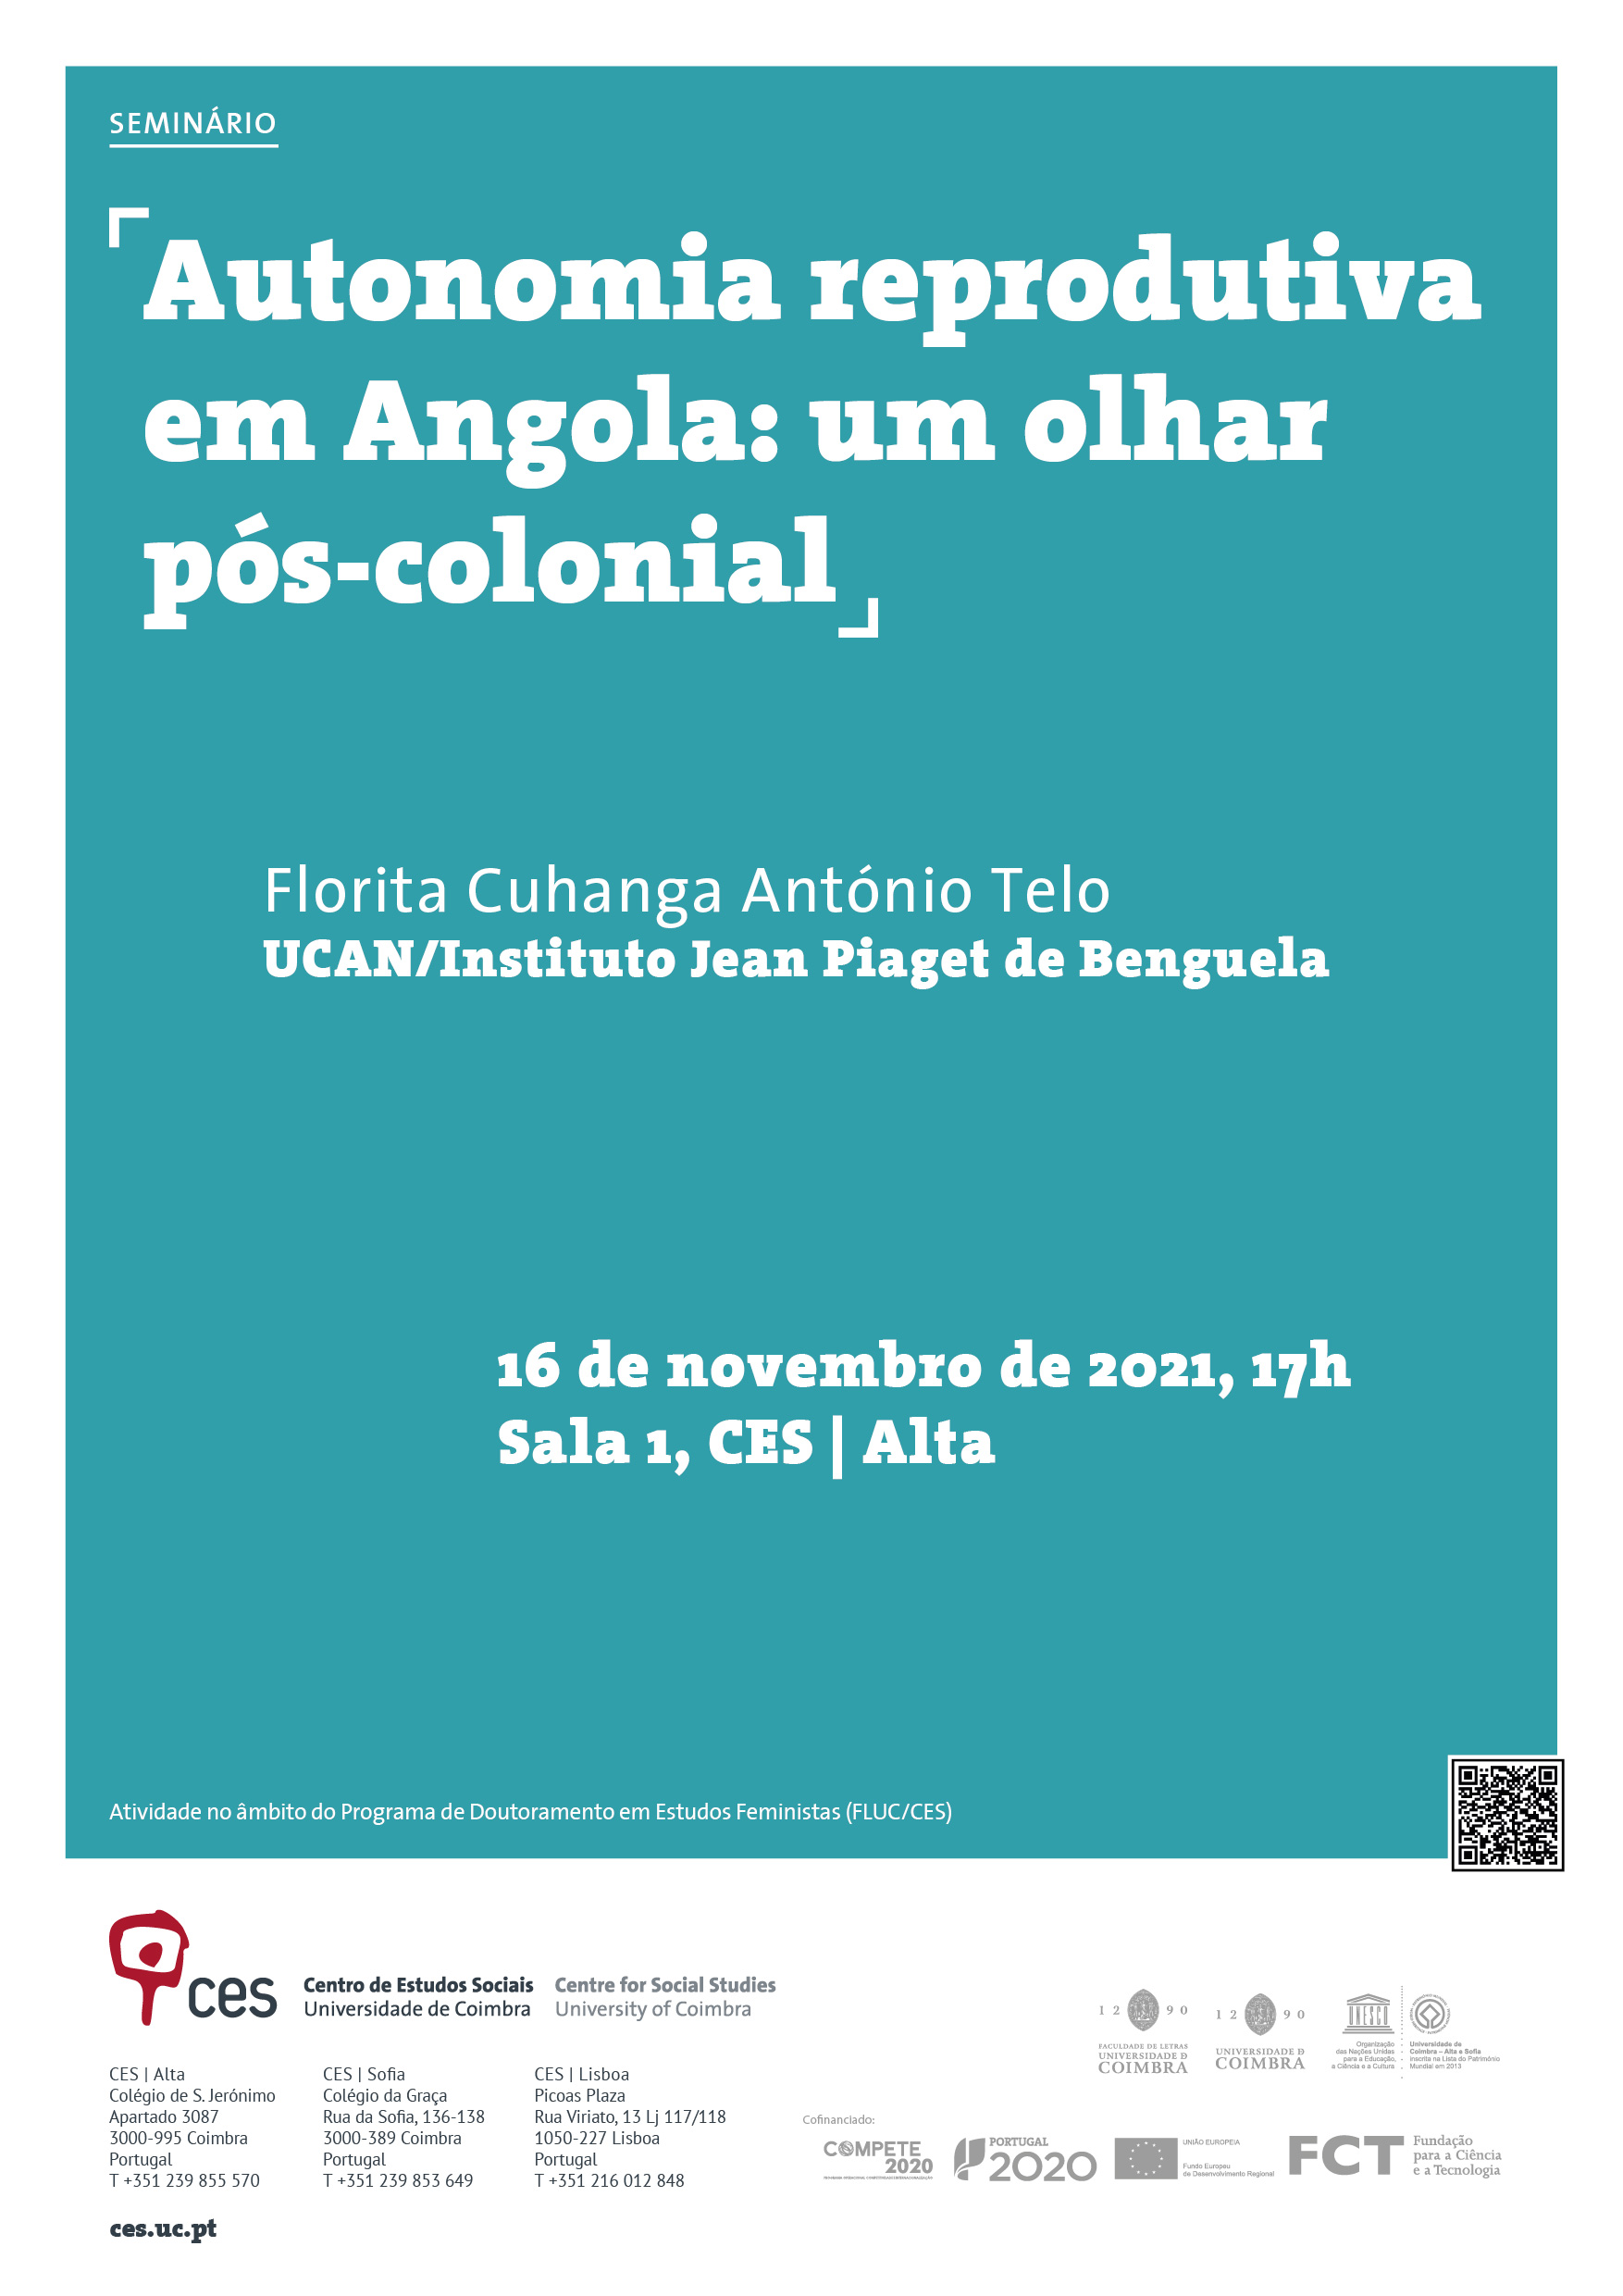 Reproductive Autonomy in Angola: a post-colonial view<span id="edit_36127"><script>$(function() { $('#edit_36127').load( "/myces/user/editobj.php?tipo=evento&id=36127" ); });</script></span>